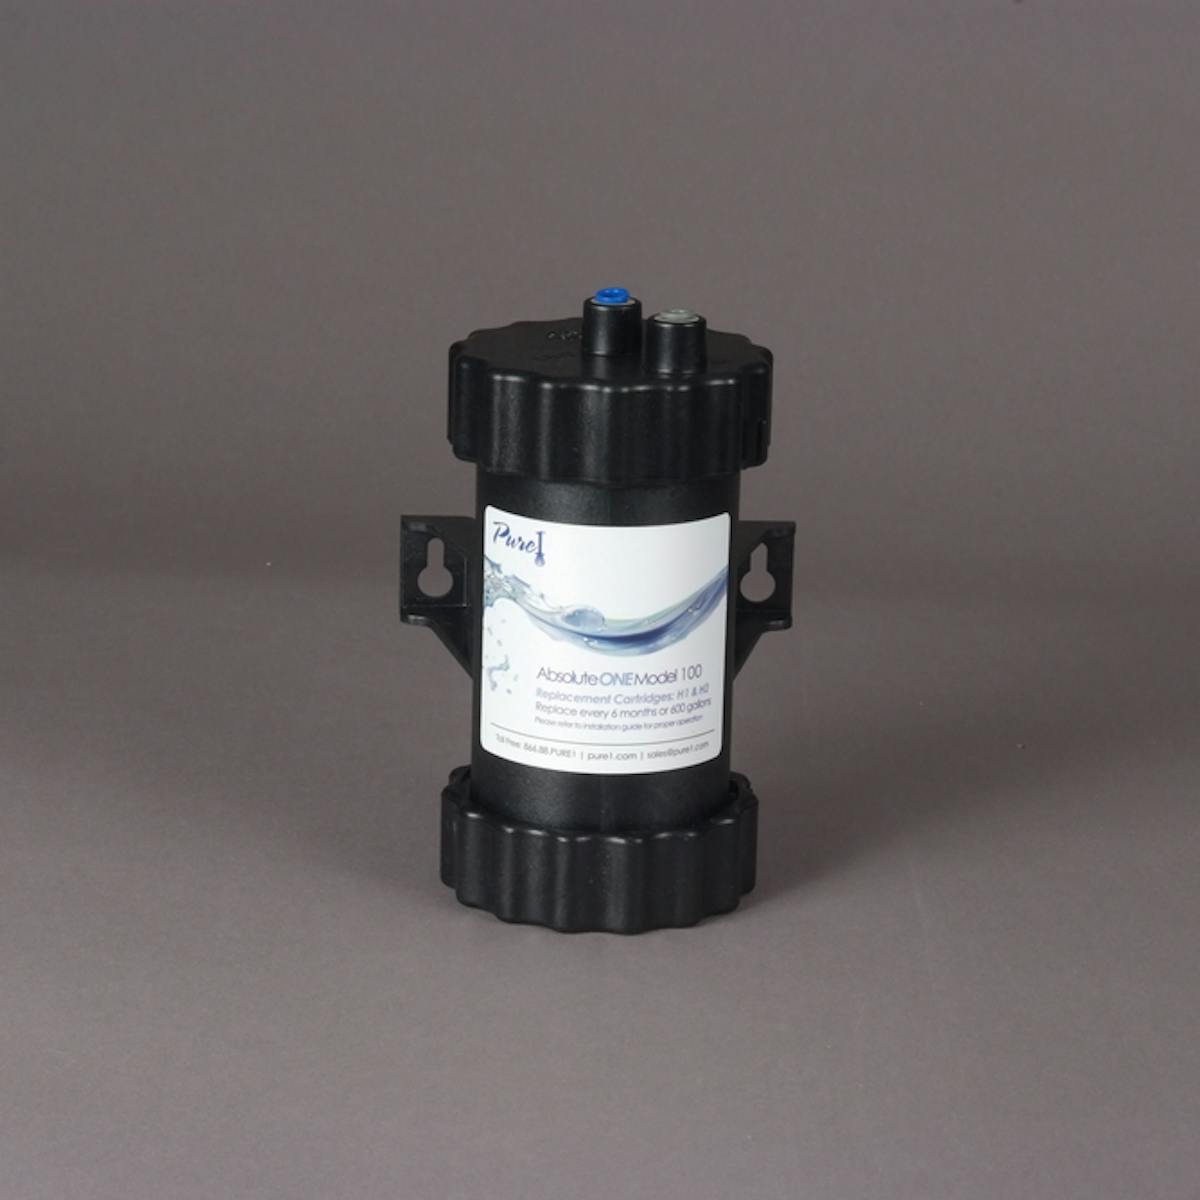 Water filters come in various sizes and styles. This cartridge from Pure1 Systems, filters water through a 4-zone sediment cartridge from 5.0 microns down to .5 micron, absolute, eliminating 99.9 percent of impurities and bacteria that are half micron in size or larger.